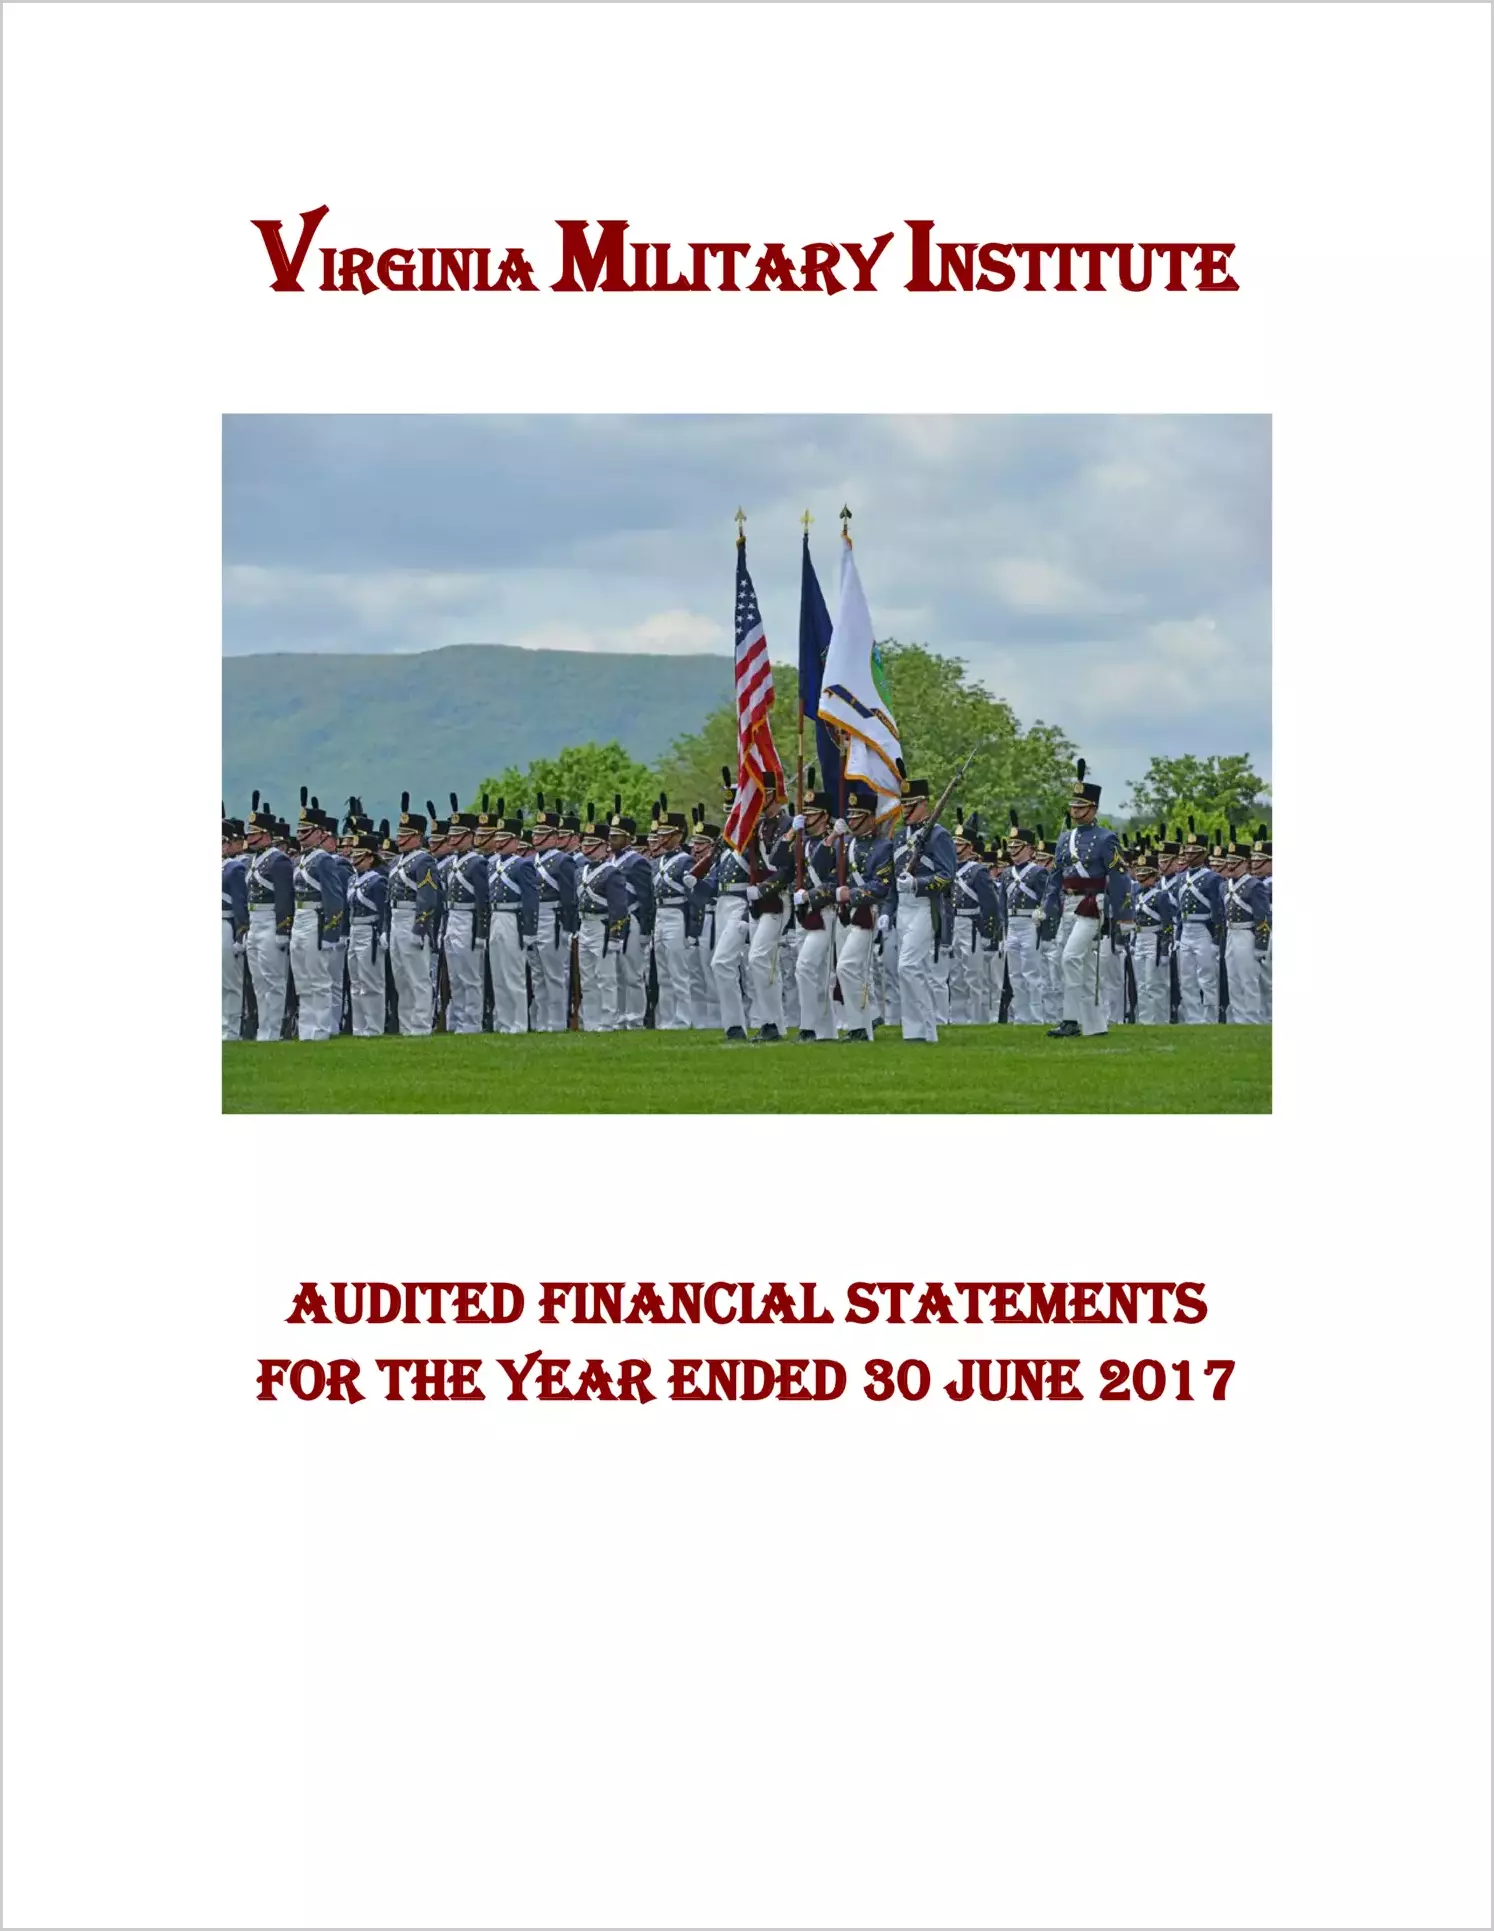 Virginia Military Institute Financial Statements for the year ended June 30, 2017